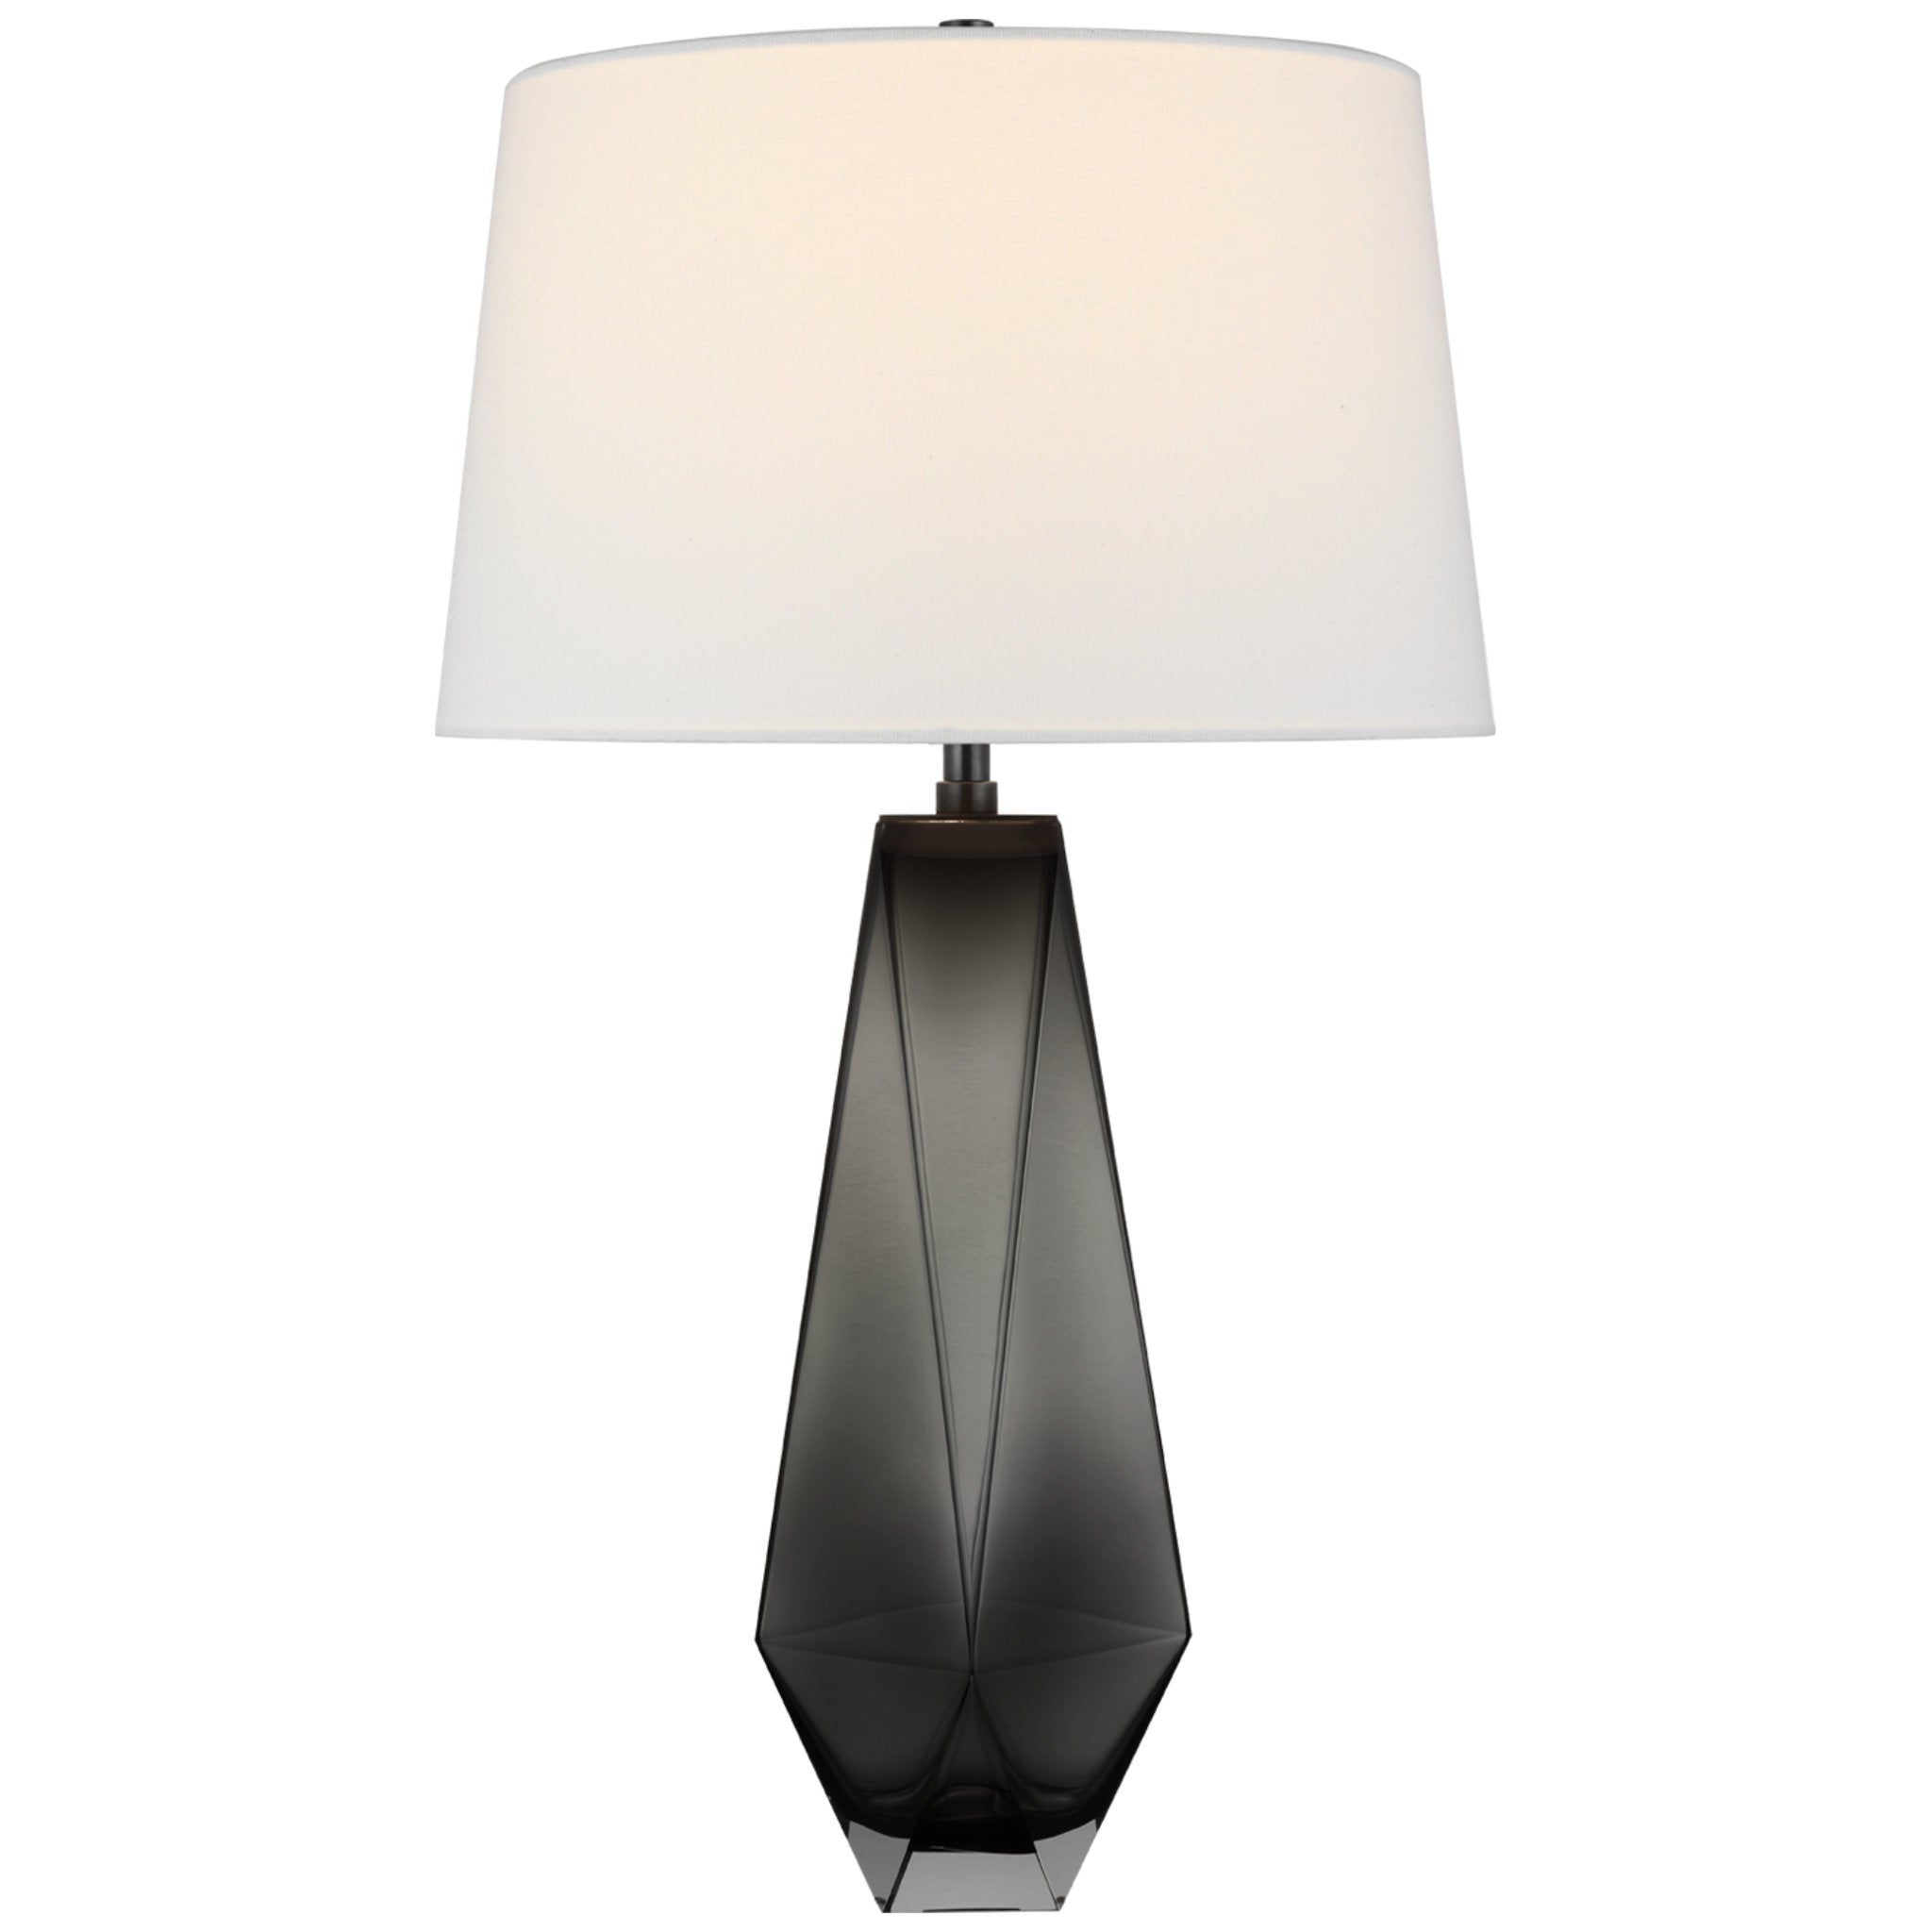 Chapman & Myers Gemma Medium Table Lamp in Smoked Glass with Linen Shade